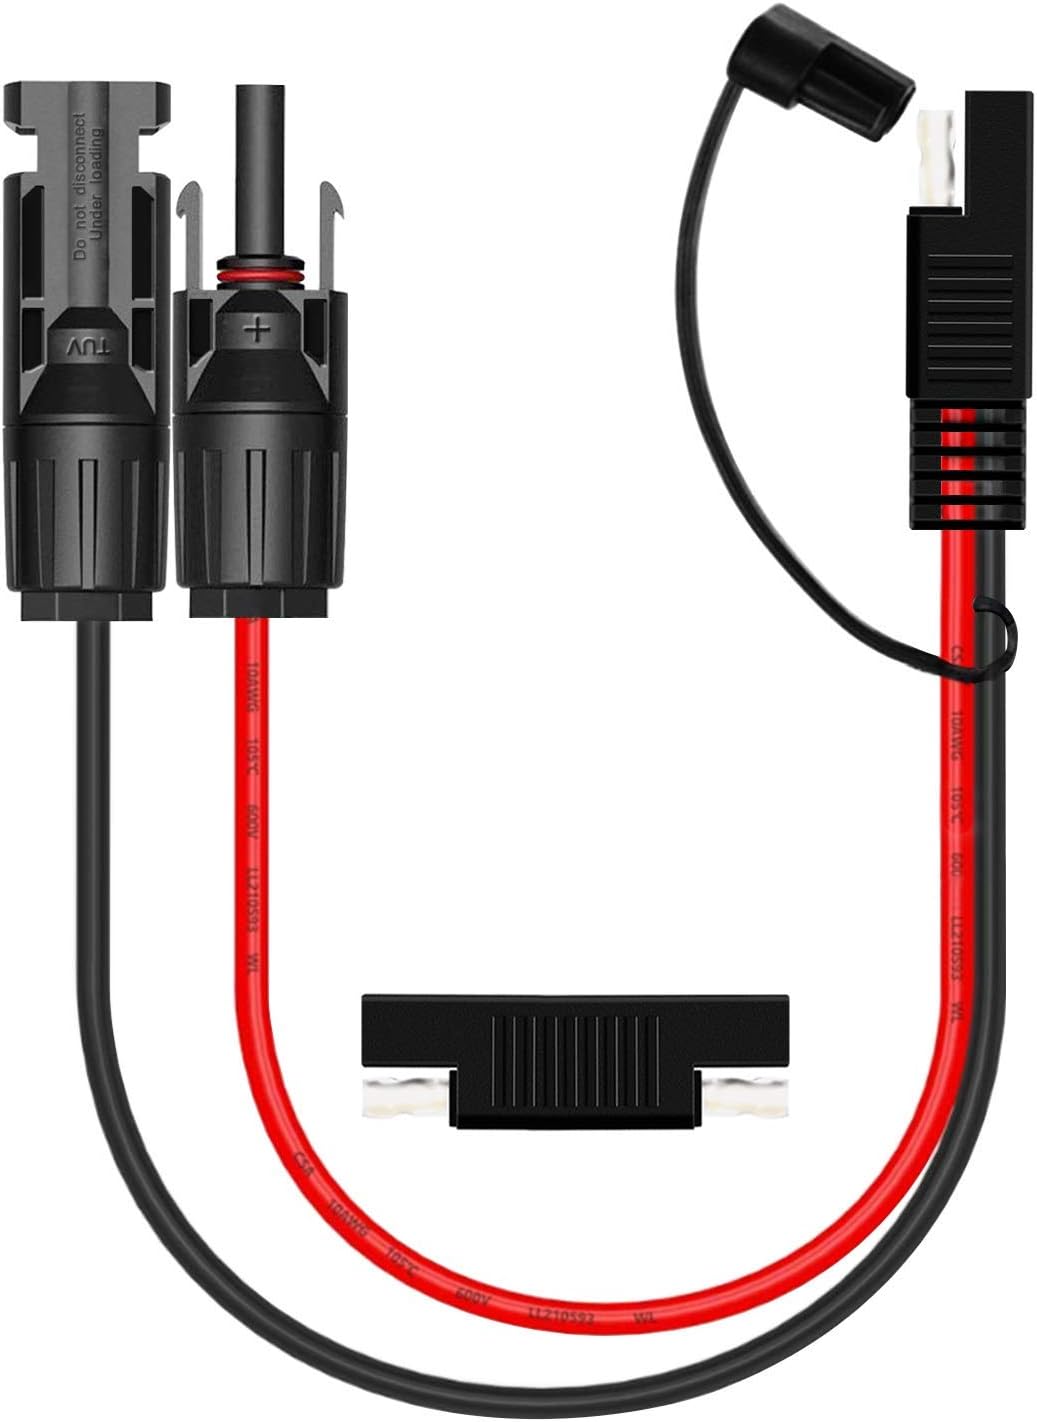 MC4 connector to SAE adapter cable 30Amp